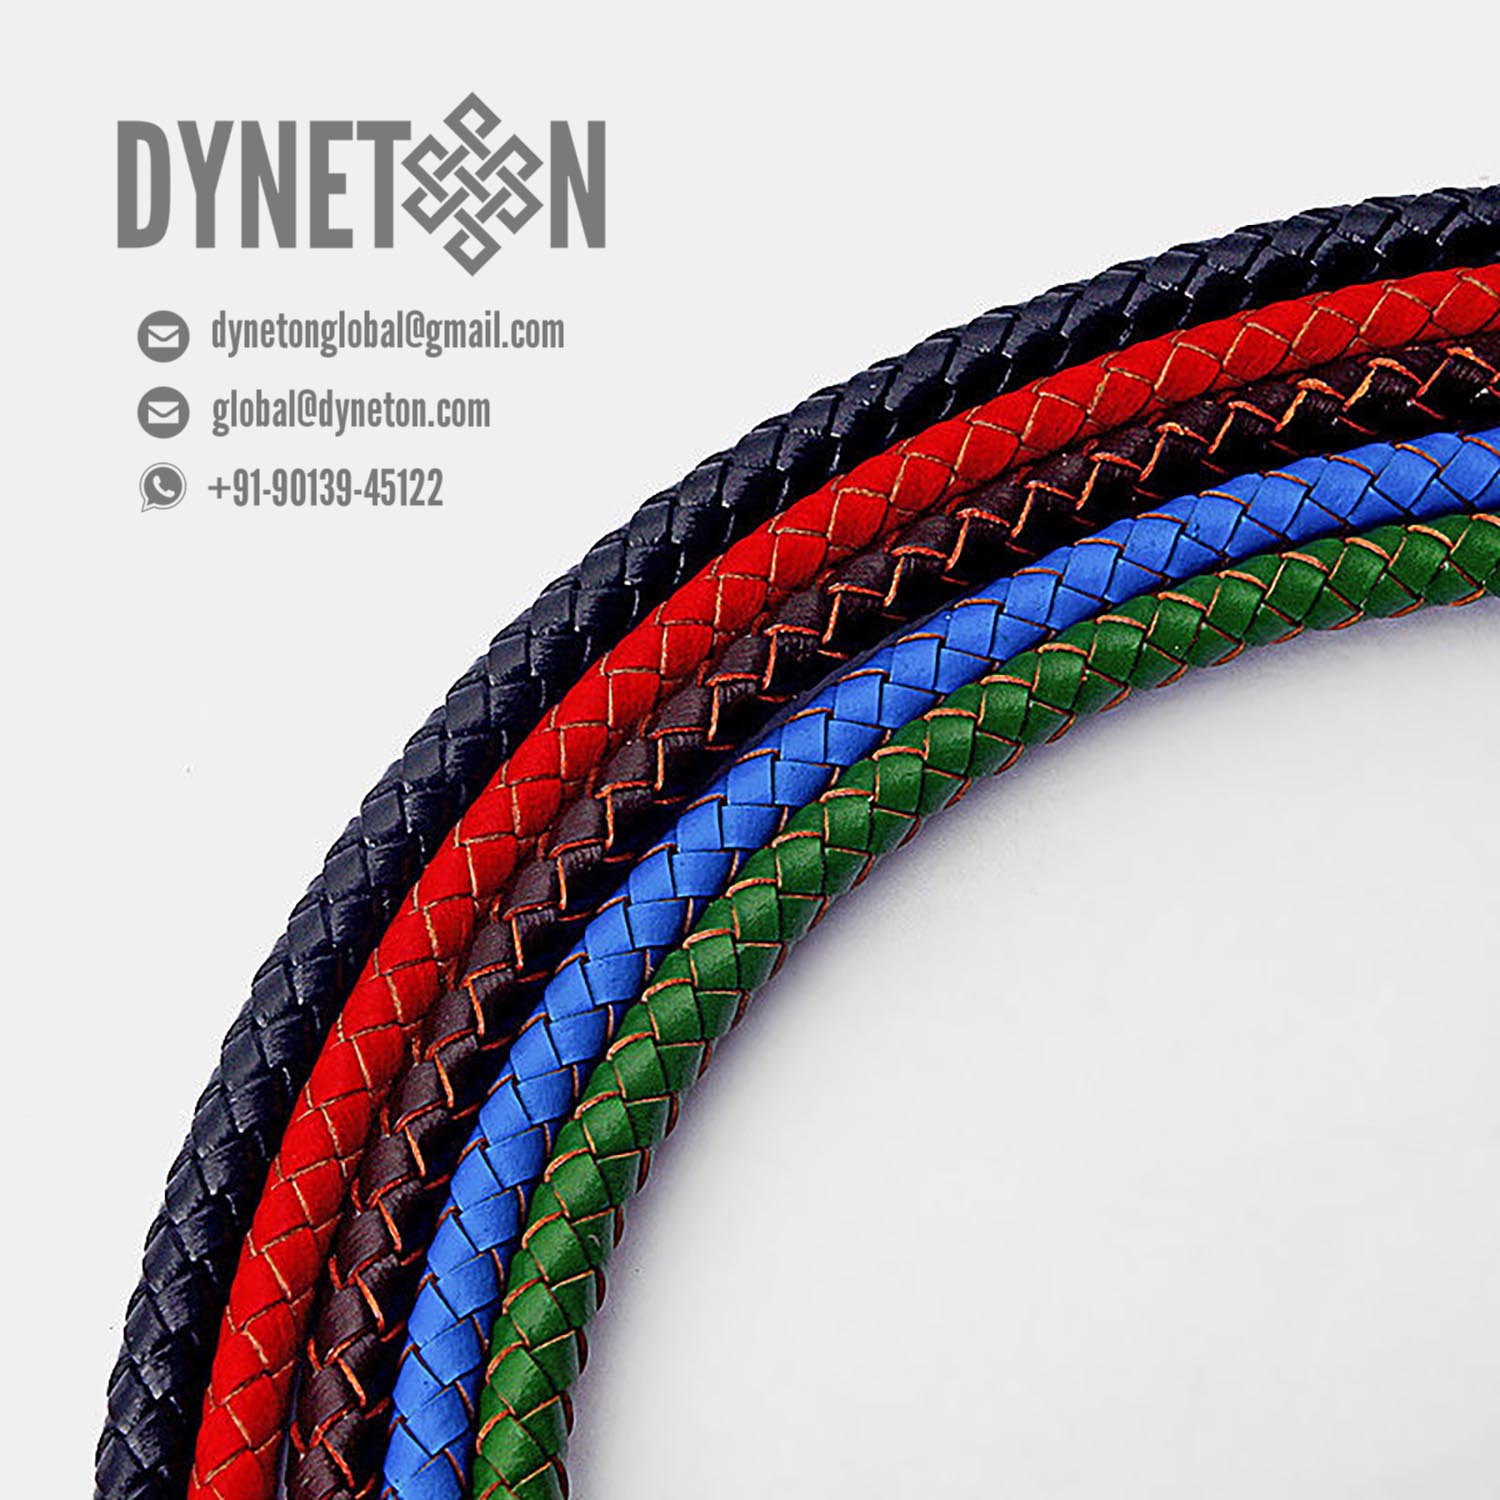 7mm Bolo Braided Leather Cord - DYNETON / Braided Leather Cords 7 mm